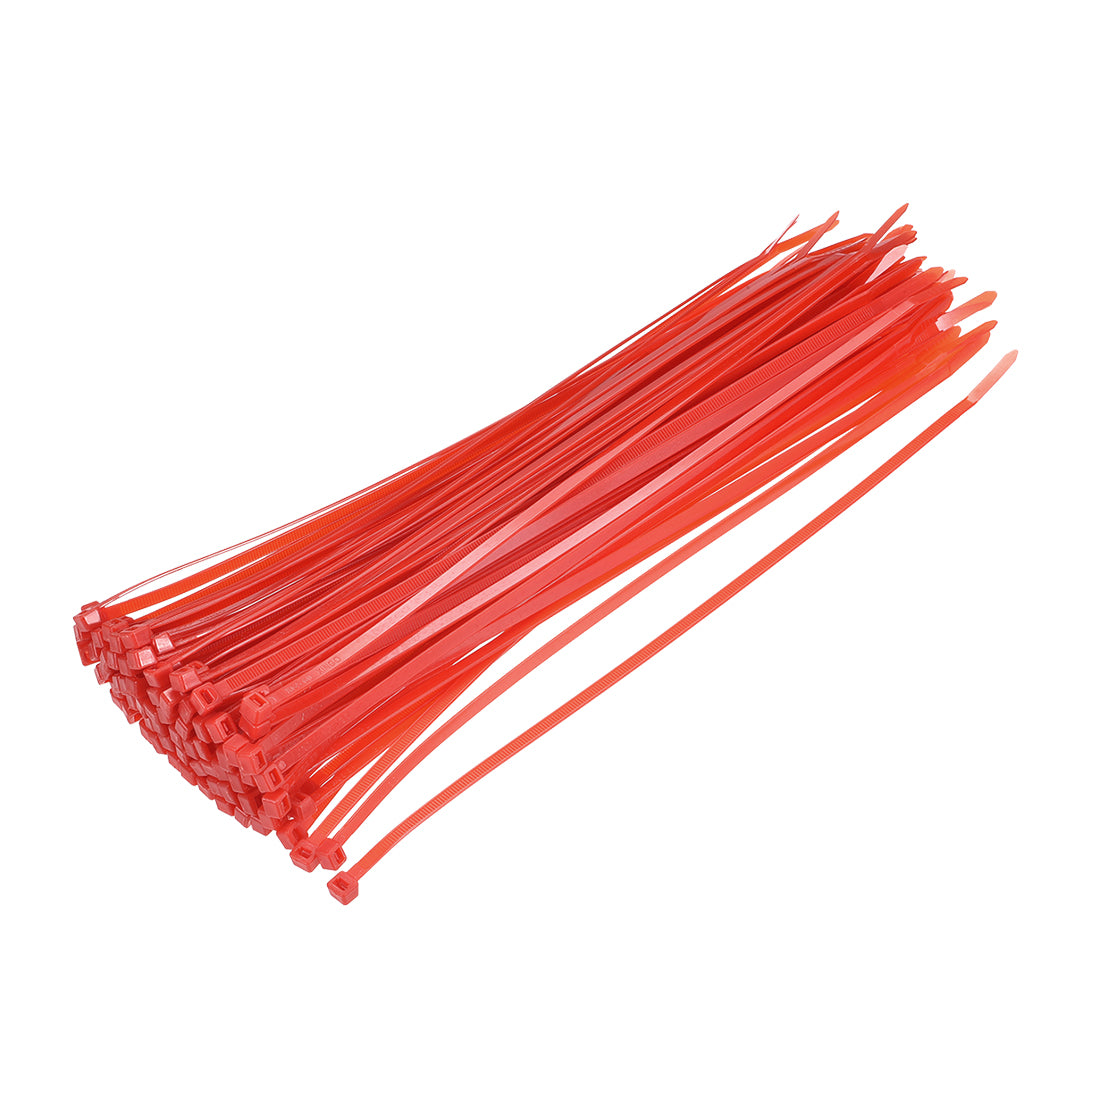 uxcell Uxcell Cable Zip Ties 300mmx4.8mm Self-Locking Nylon Tie Wraps Red 40pcs